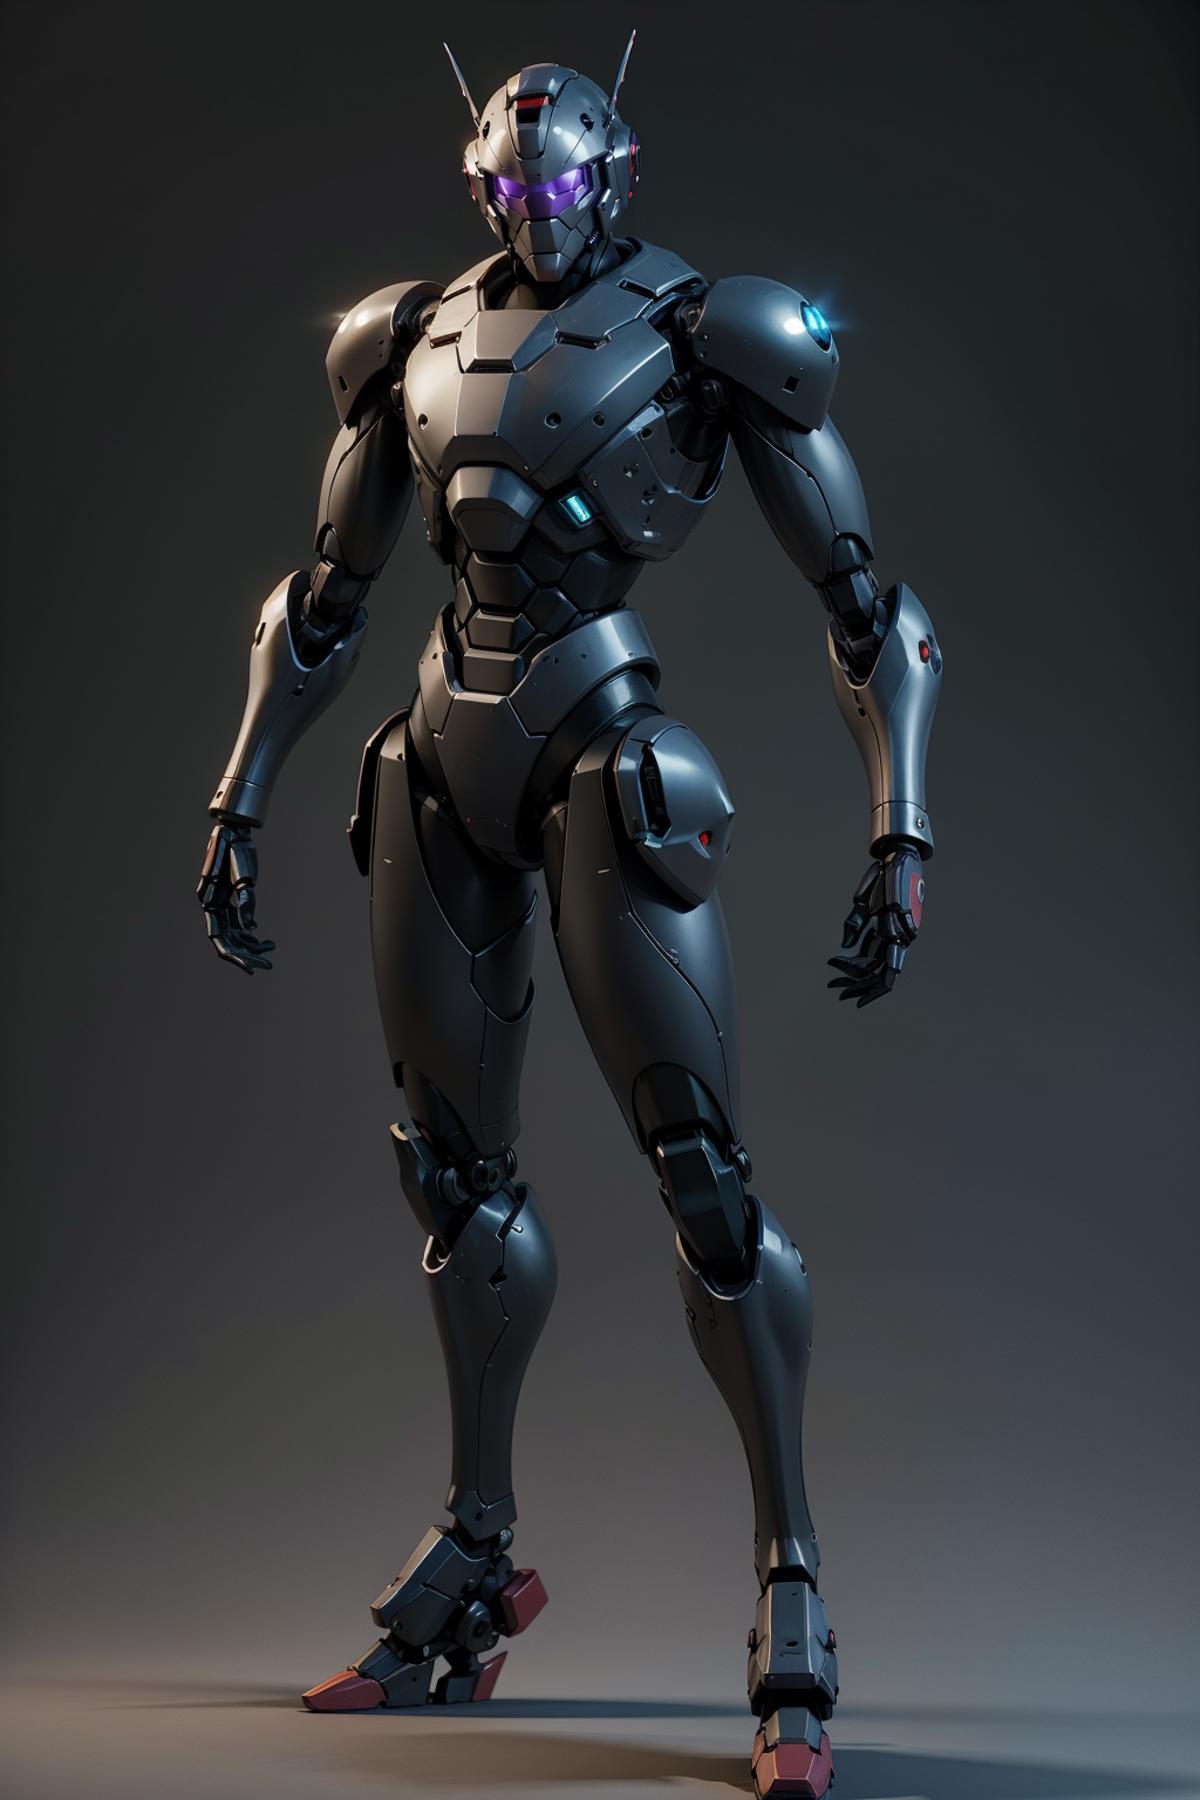 A computer-generated image of a robot with a metallic body, standing in a dark grey setting.